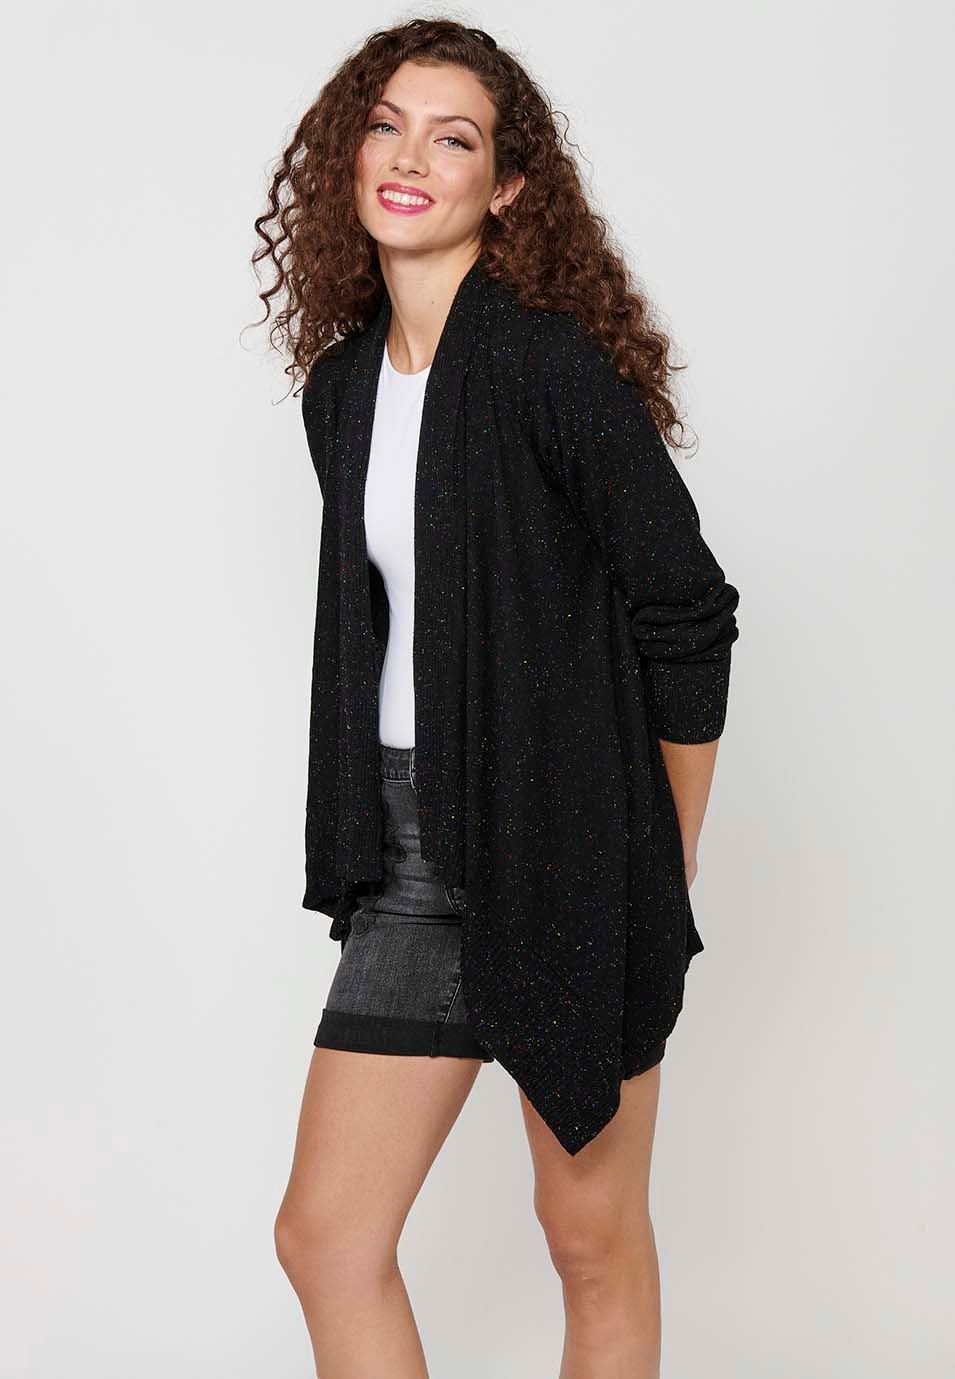 Long-sleeved tricot jacket with asymmetrical finish. Black Marbled Tricot for Women 4